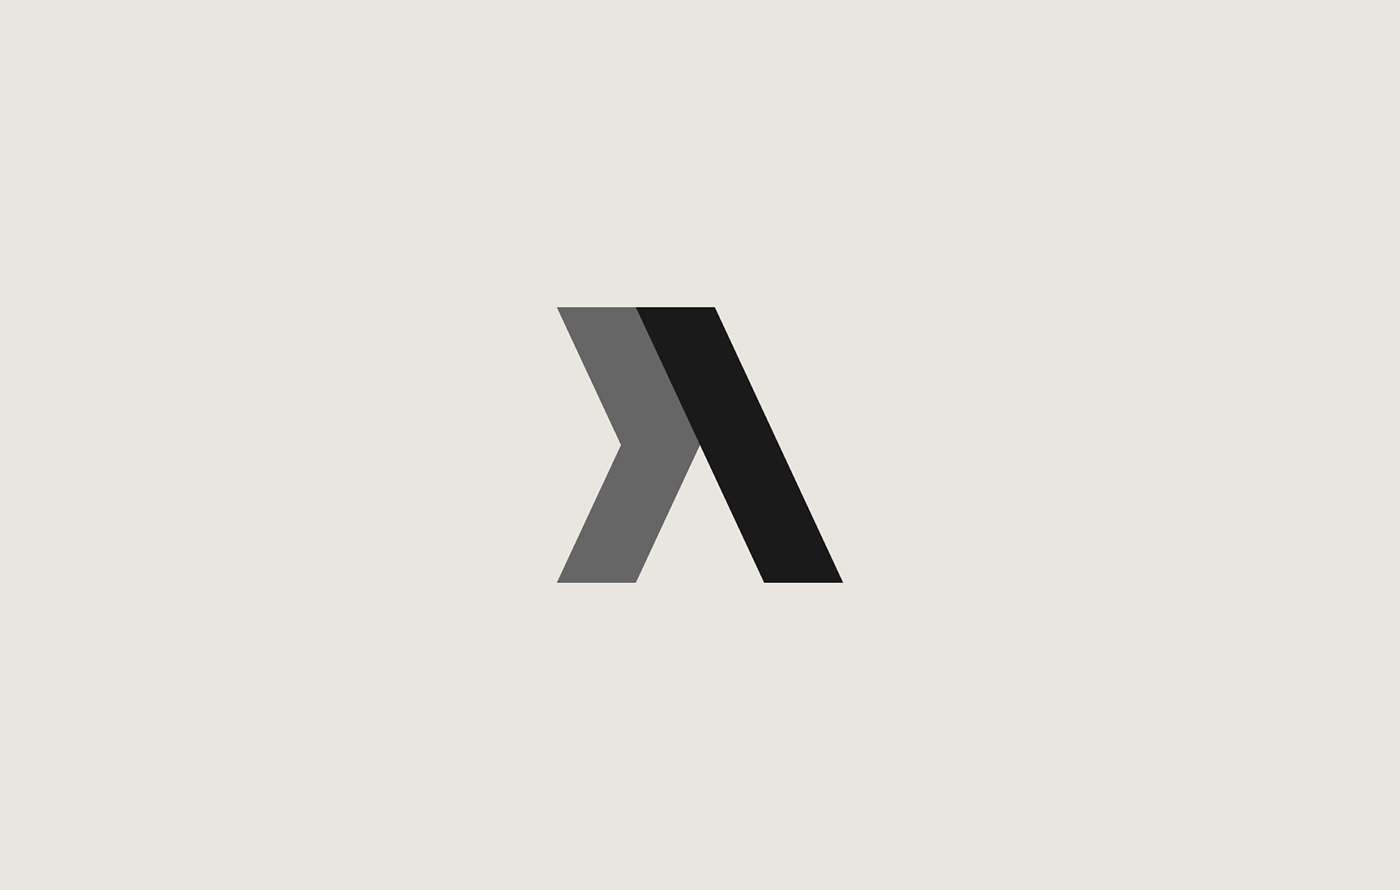 letter A logo made with coding symbols